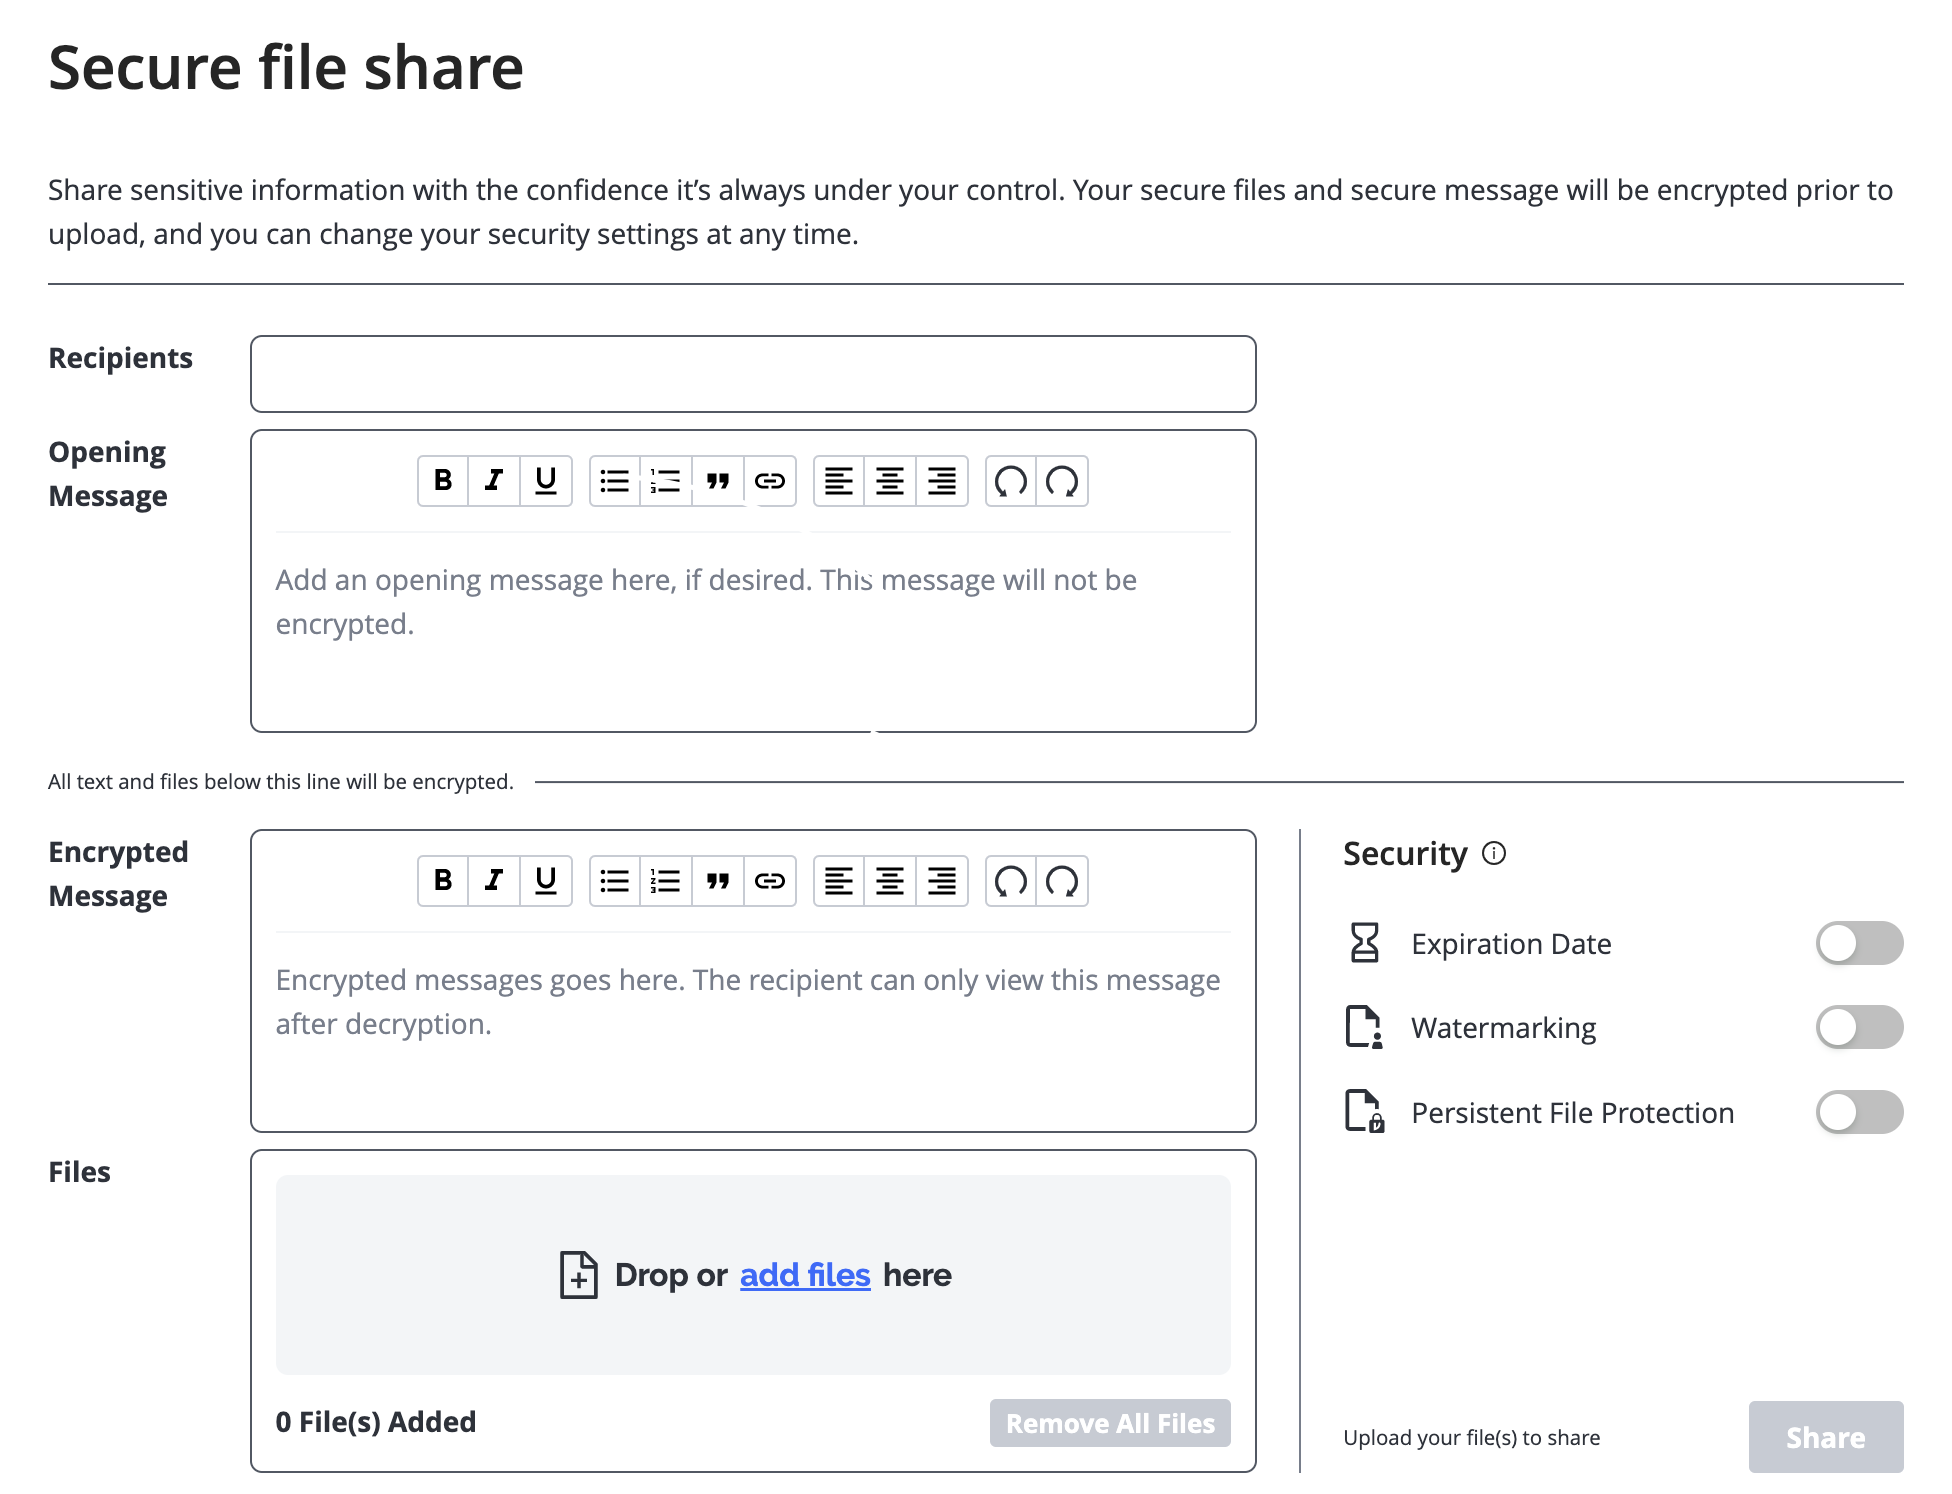 Secure file share page